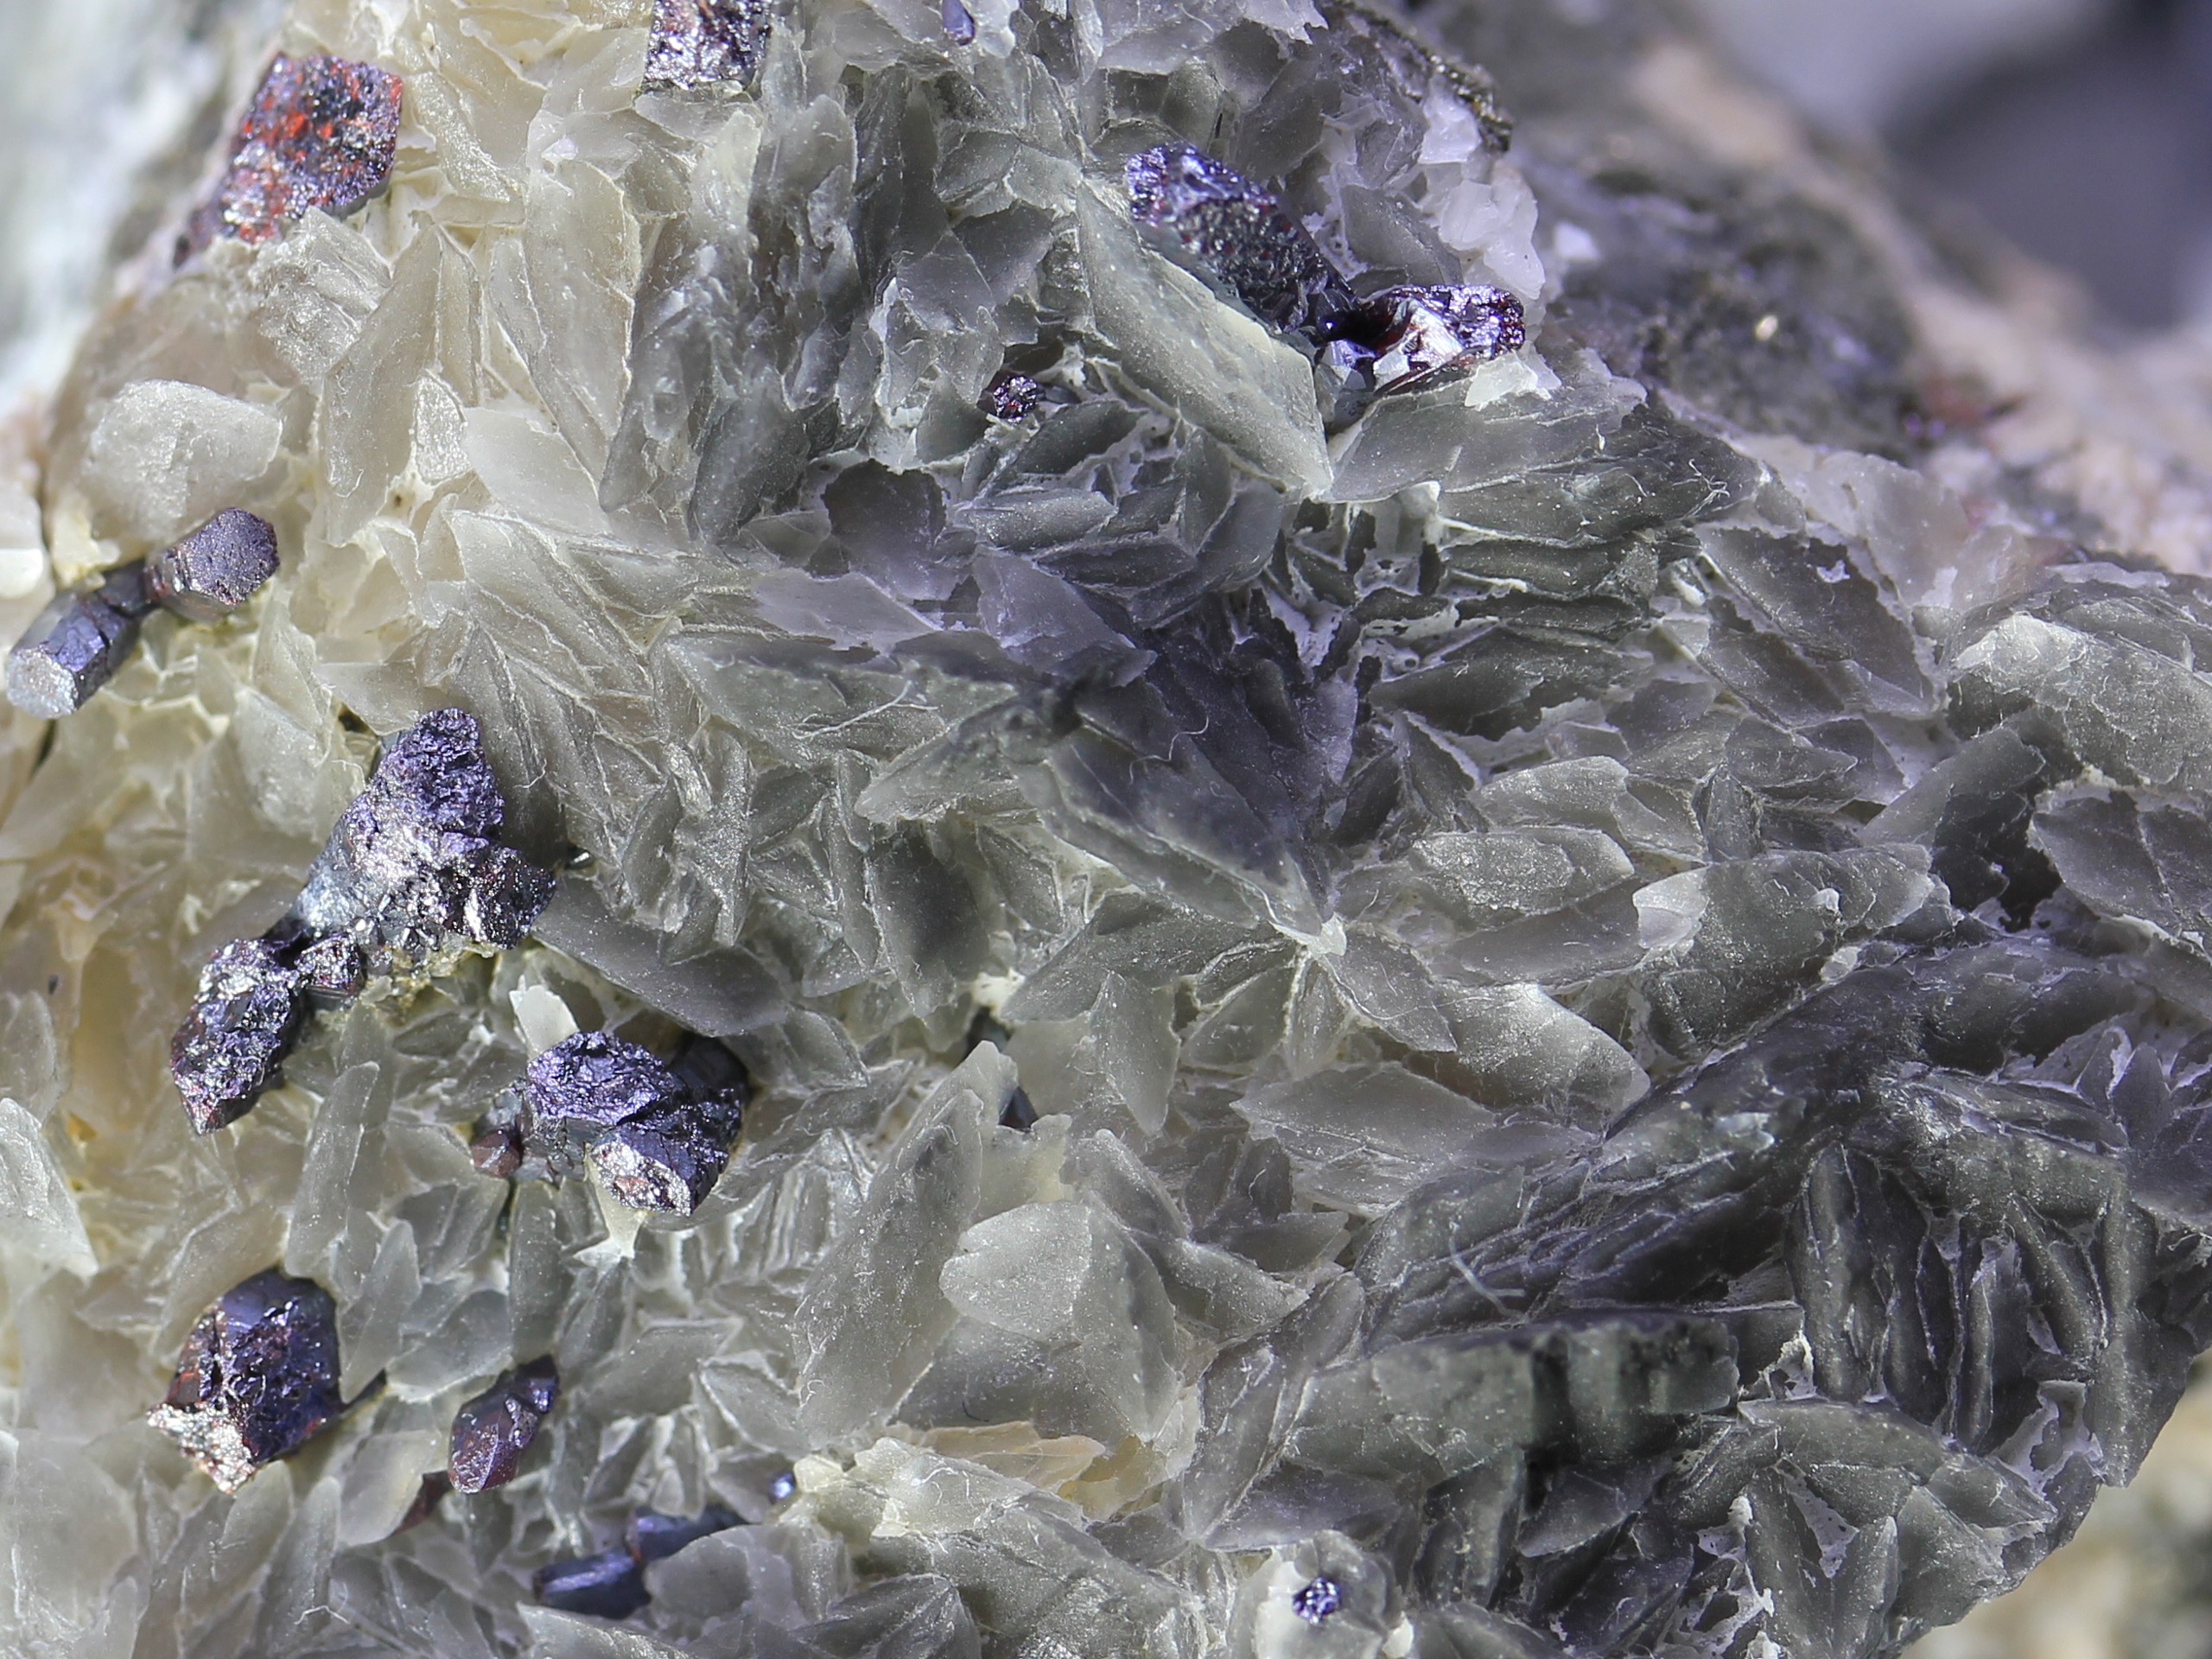 Proustite crystals on a calcite layer